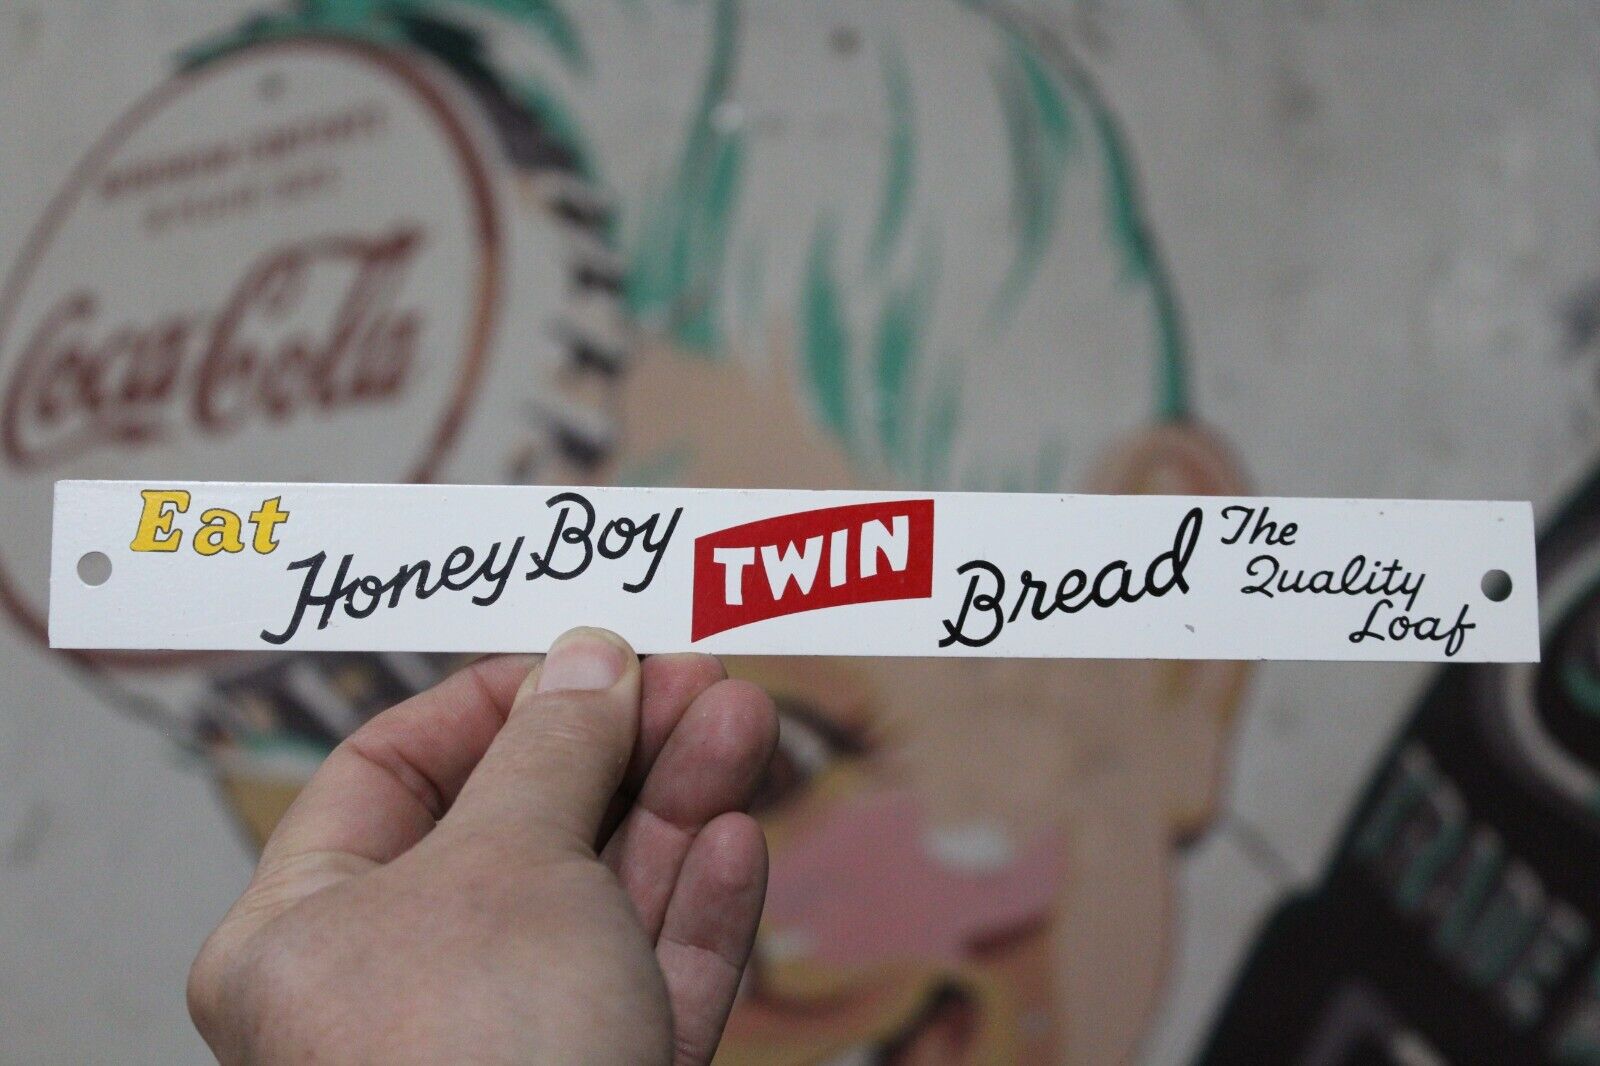 1950s EAT HONEY BOY TWIN BREAD THE QUALITY LOAF STRIP METAL DOOR SIGN BAKED